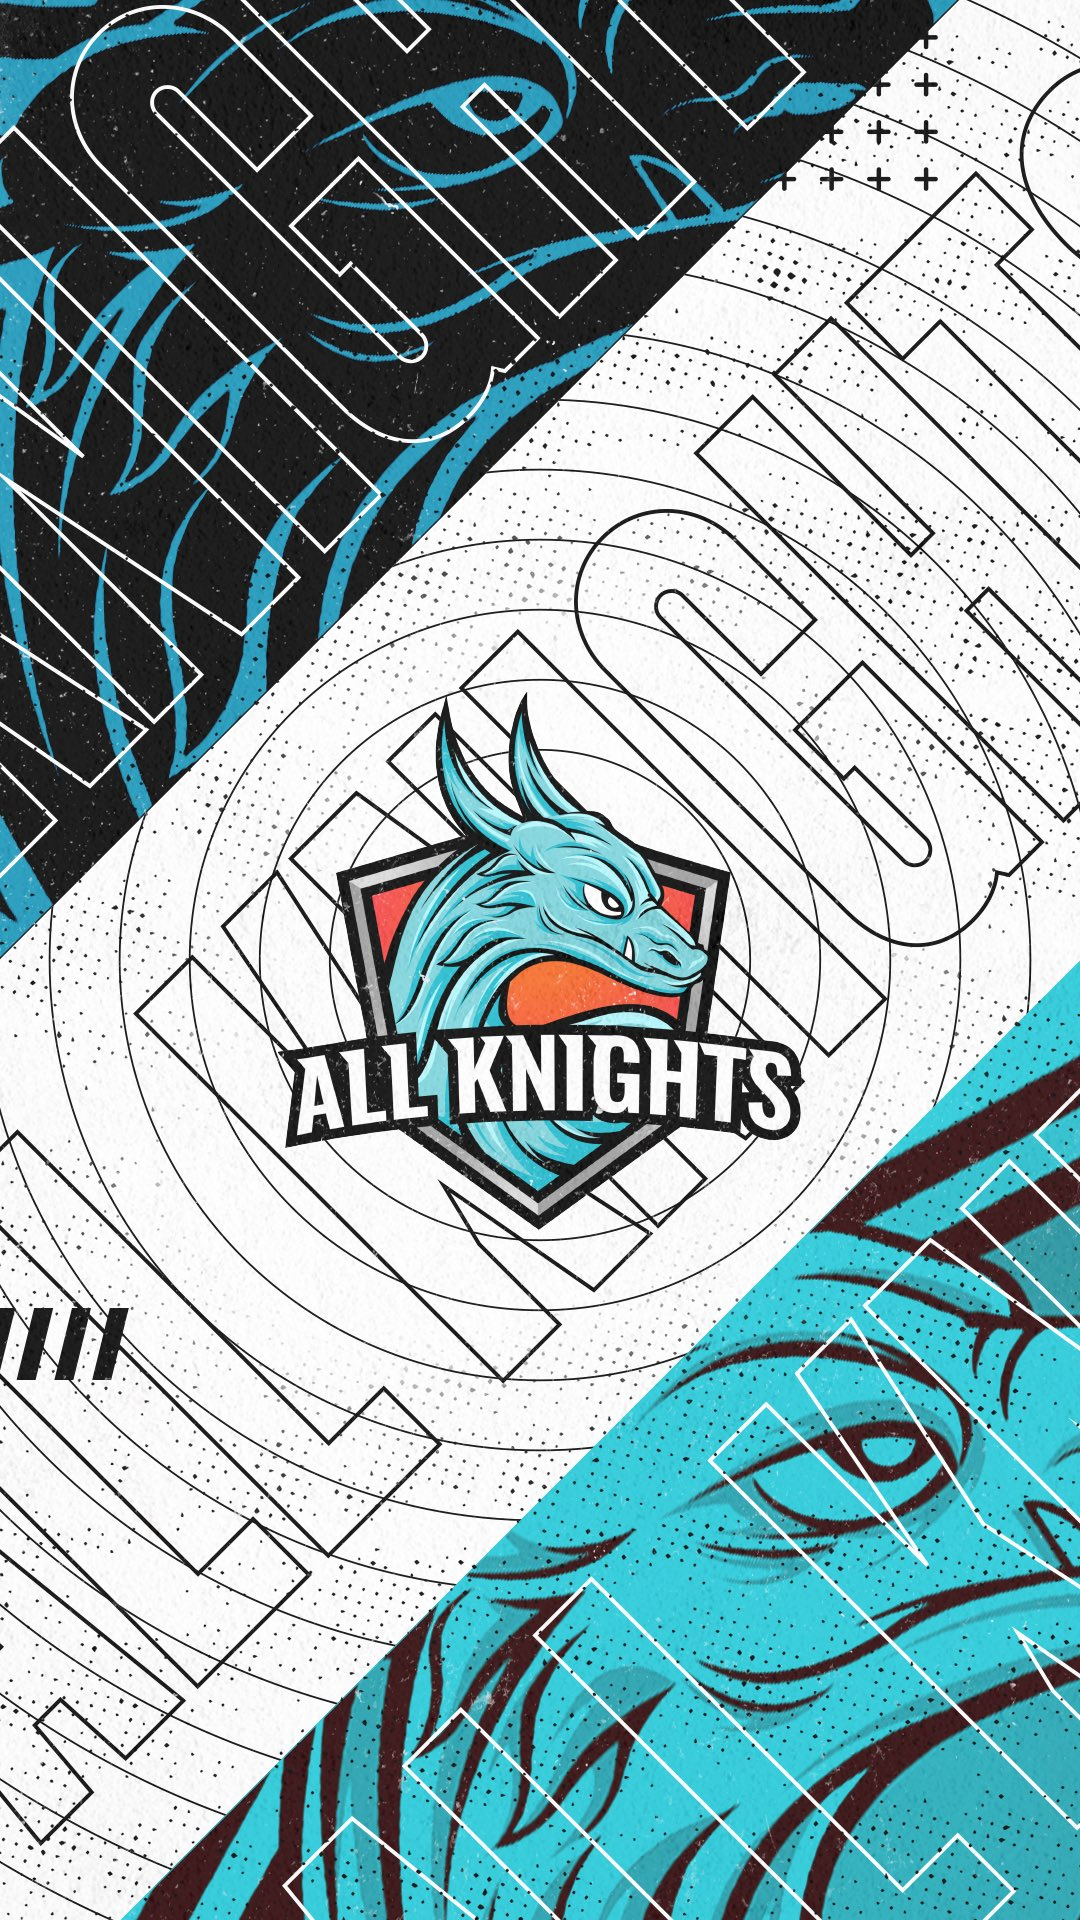 All Knights Wallpaper Esports Gaming by All Knights